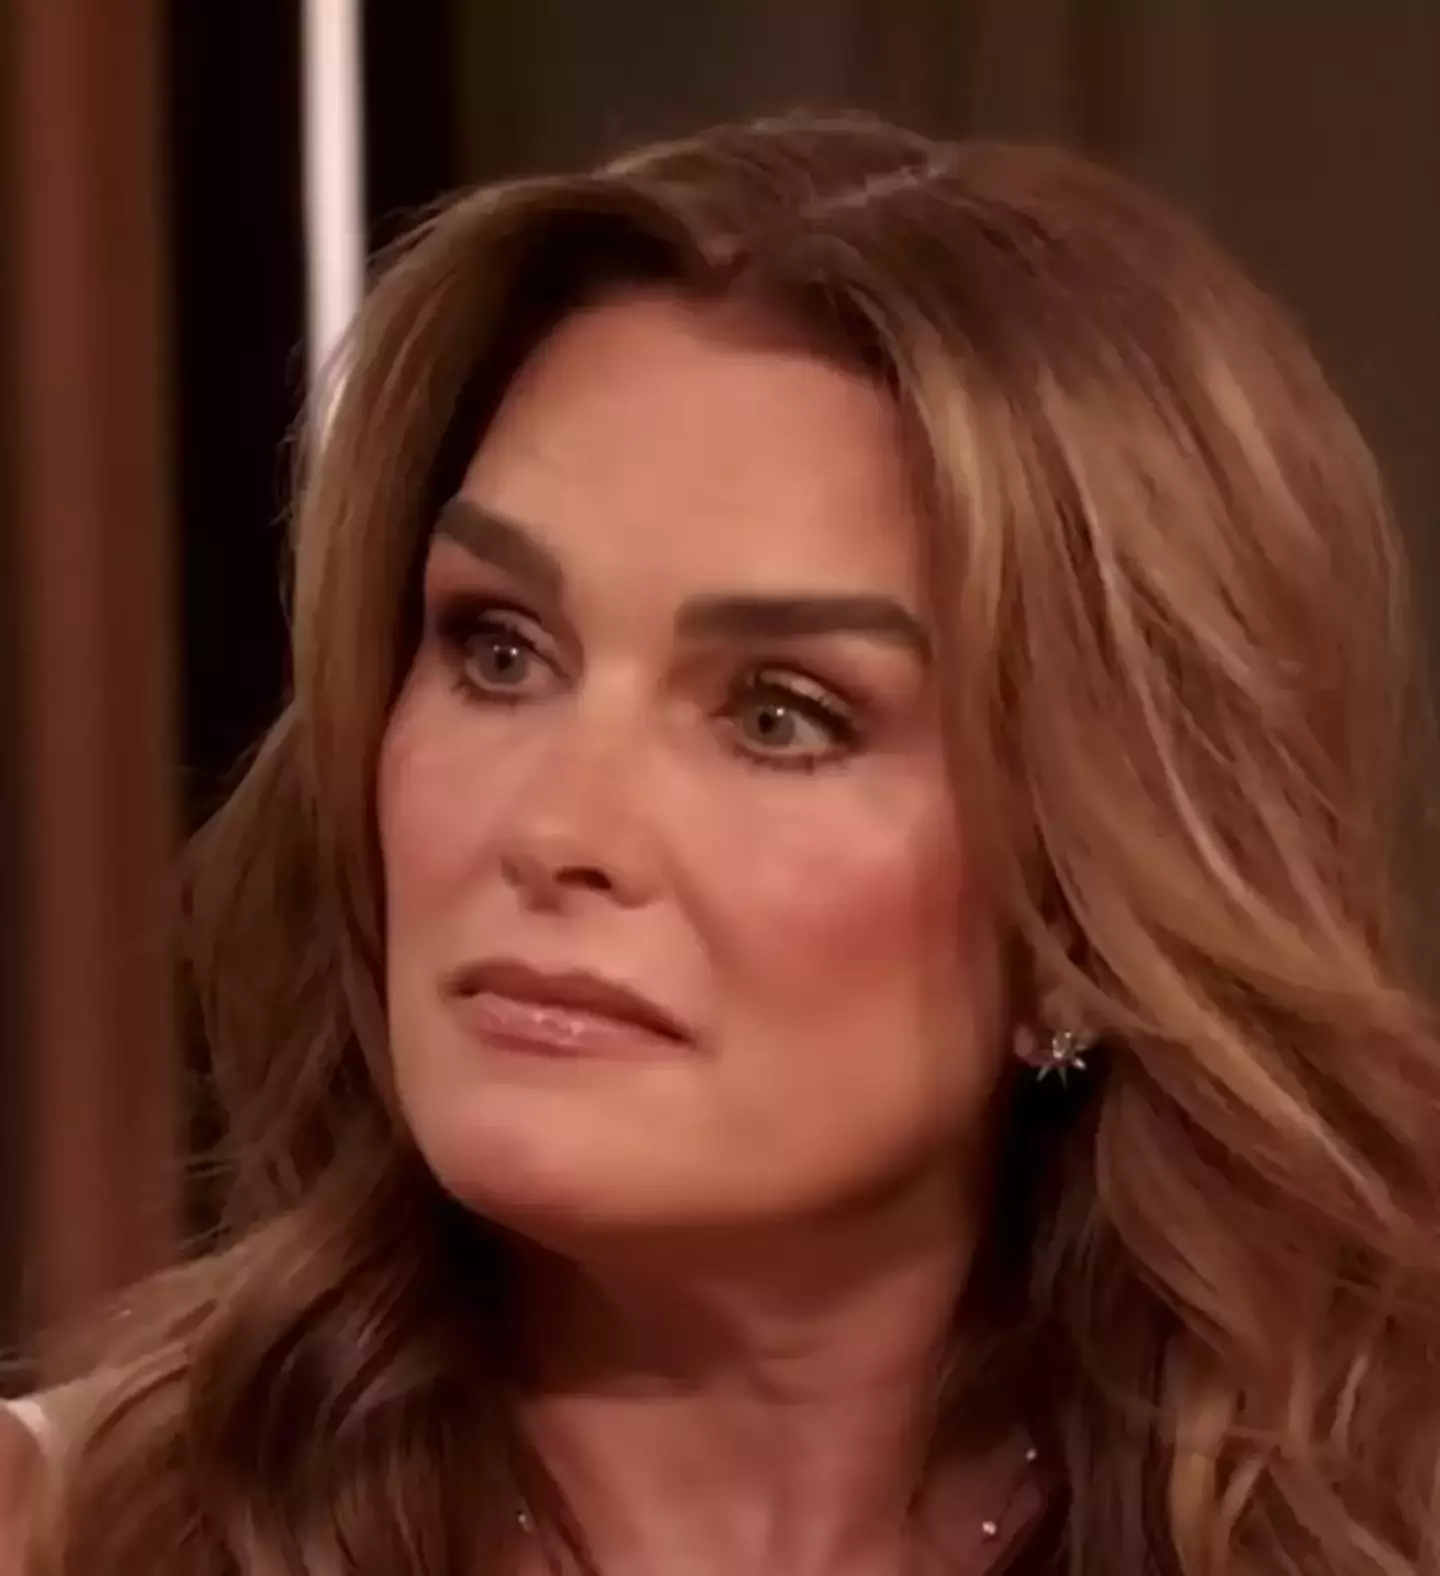 Brooke Shields opened up about her relationship with her mother.